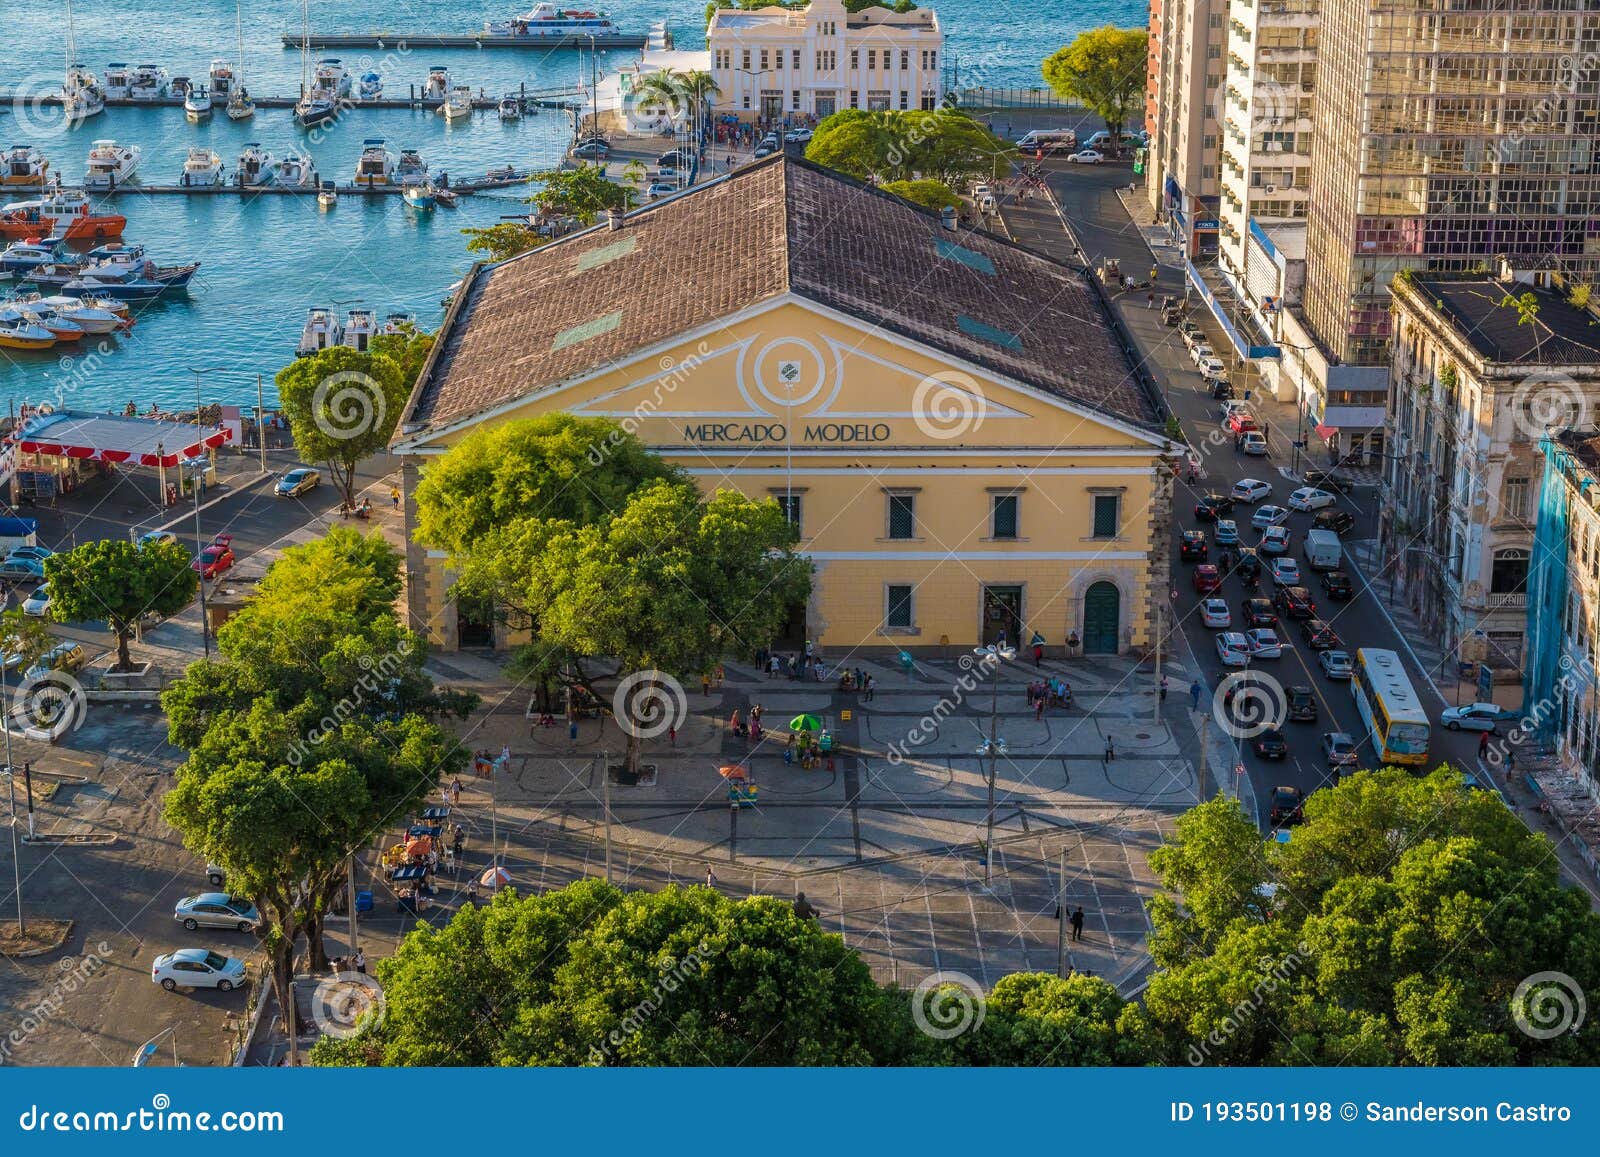 mercado modelo building, seen from lookout lacerda elevator, located in downtown city in salvador, bahia, brazil